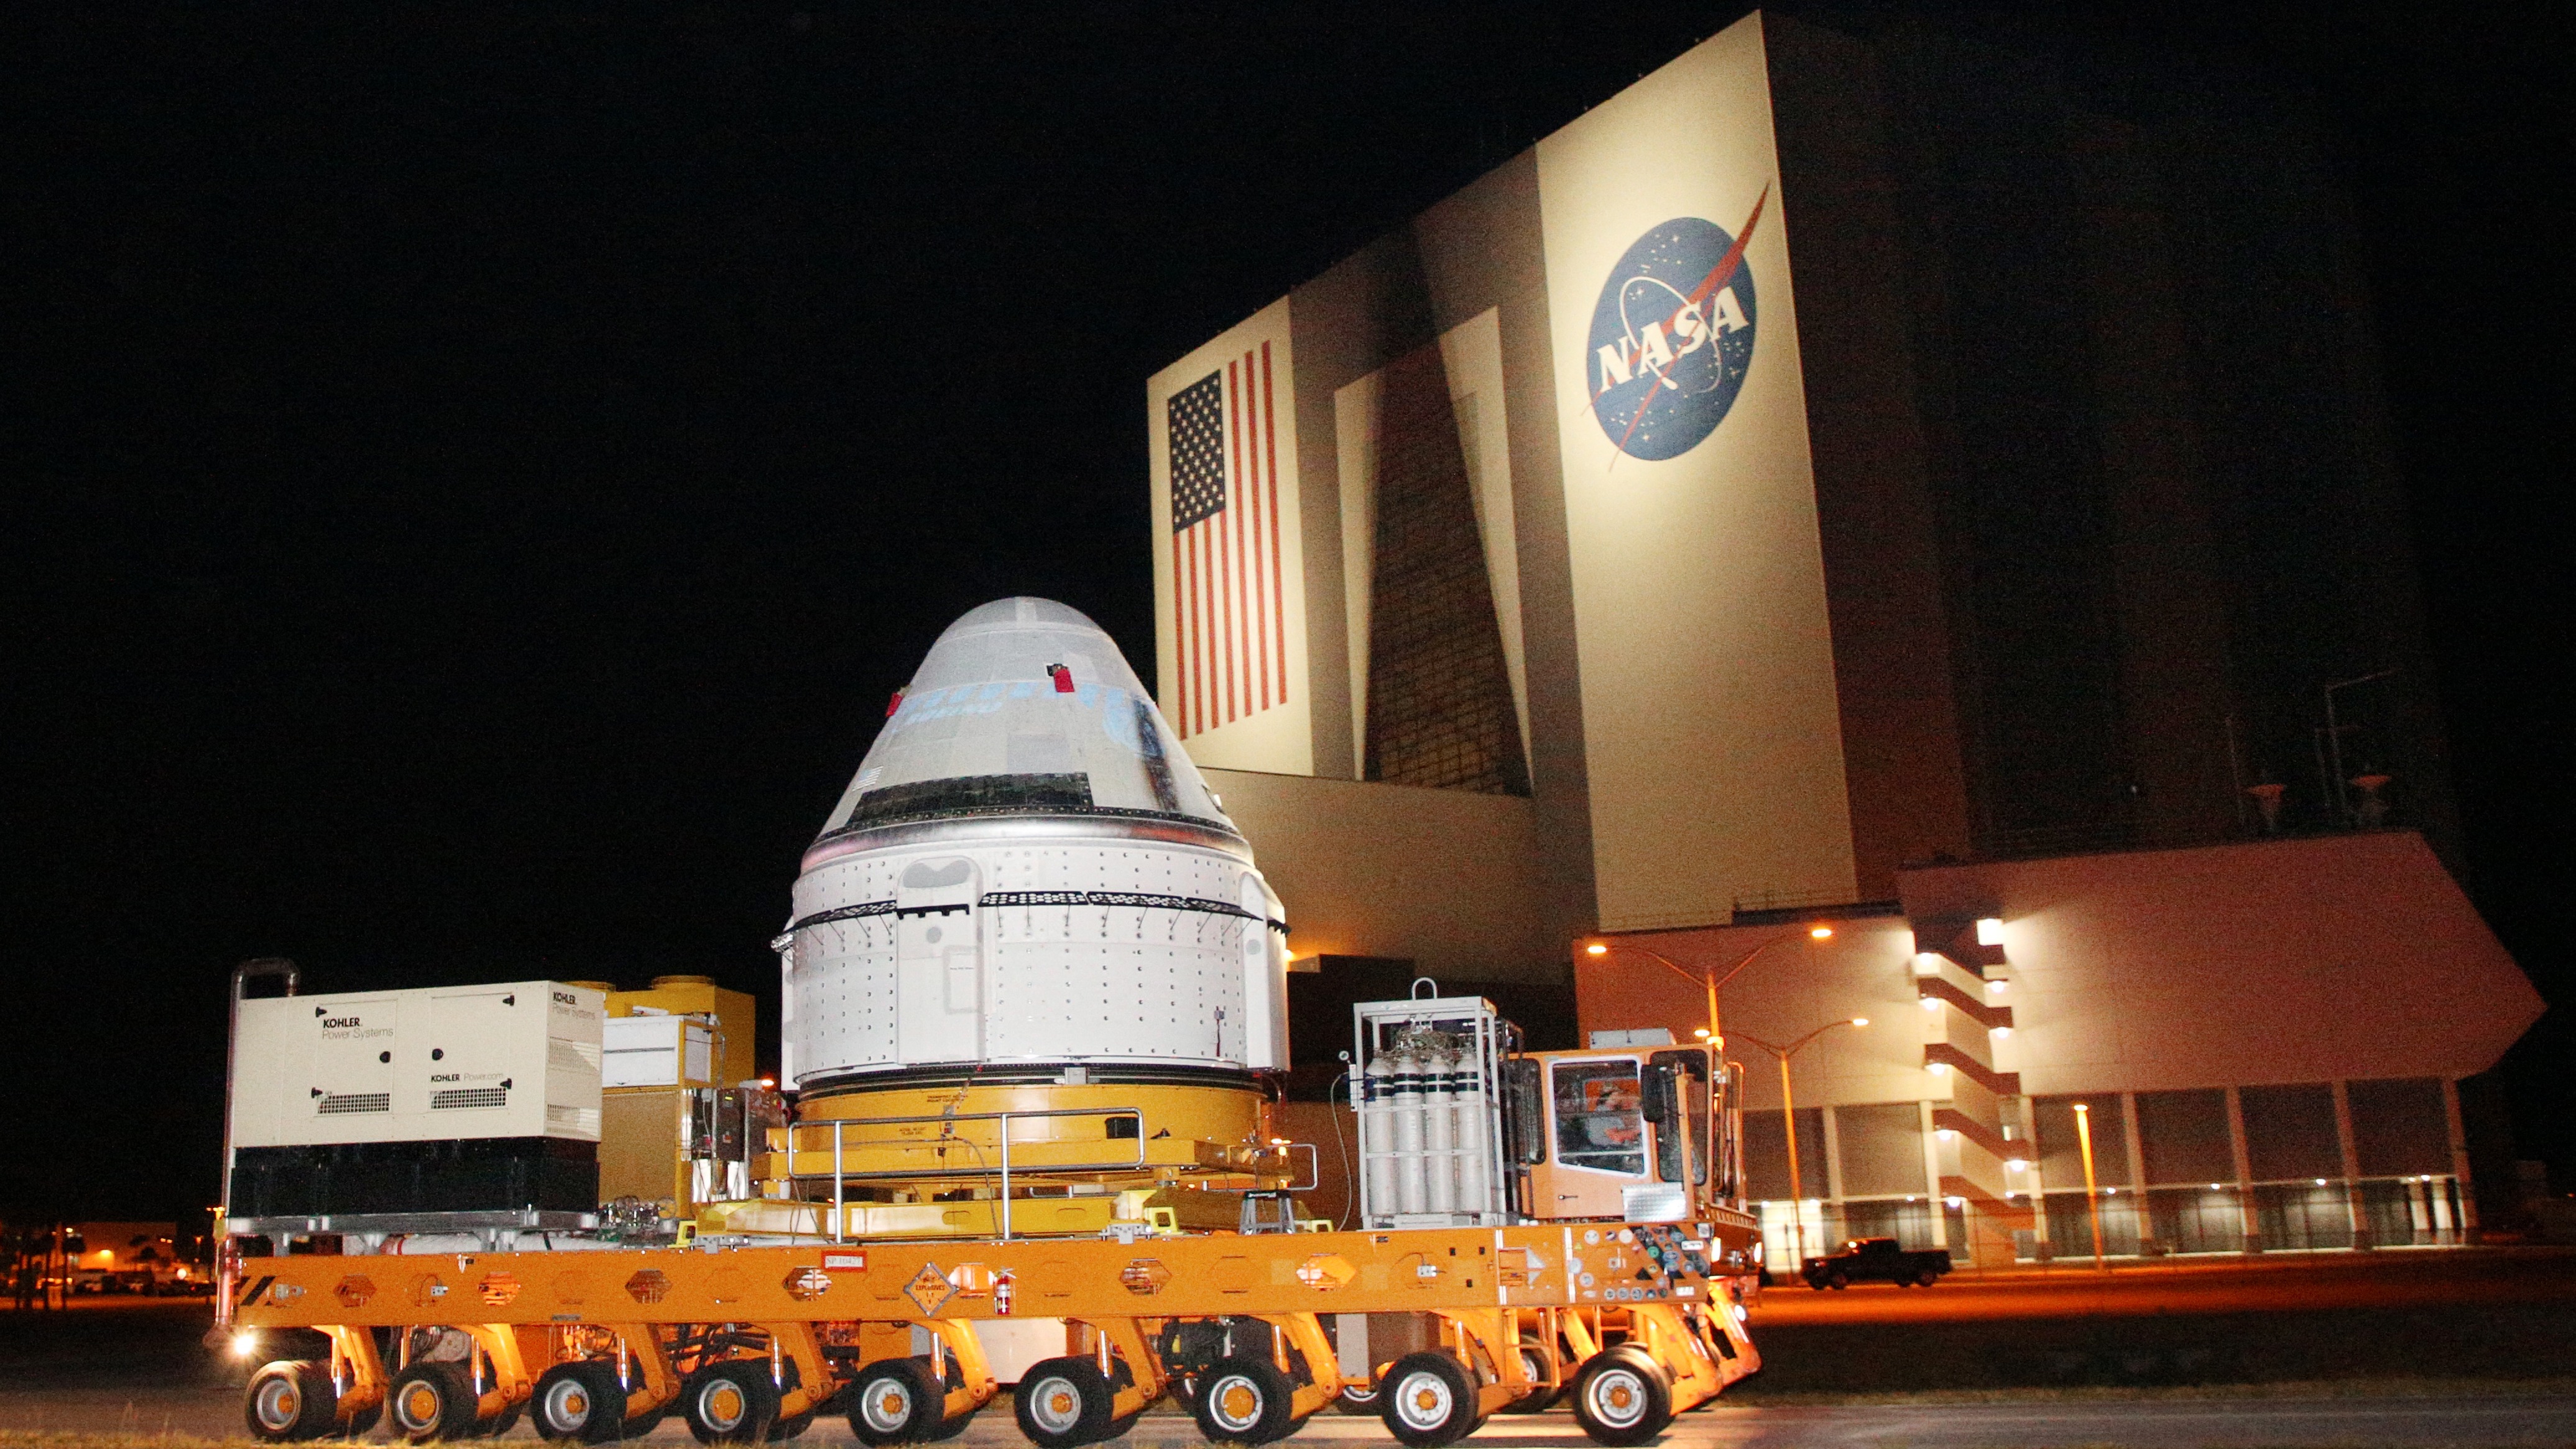 a cone-shaped spacecraft on a long trailer. in back is a large building with an american flag and nasa logo on the side